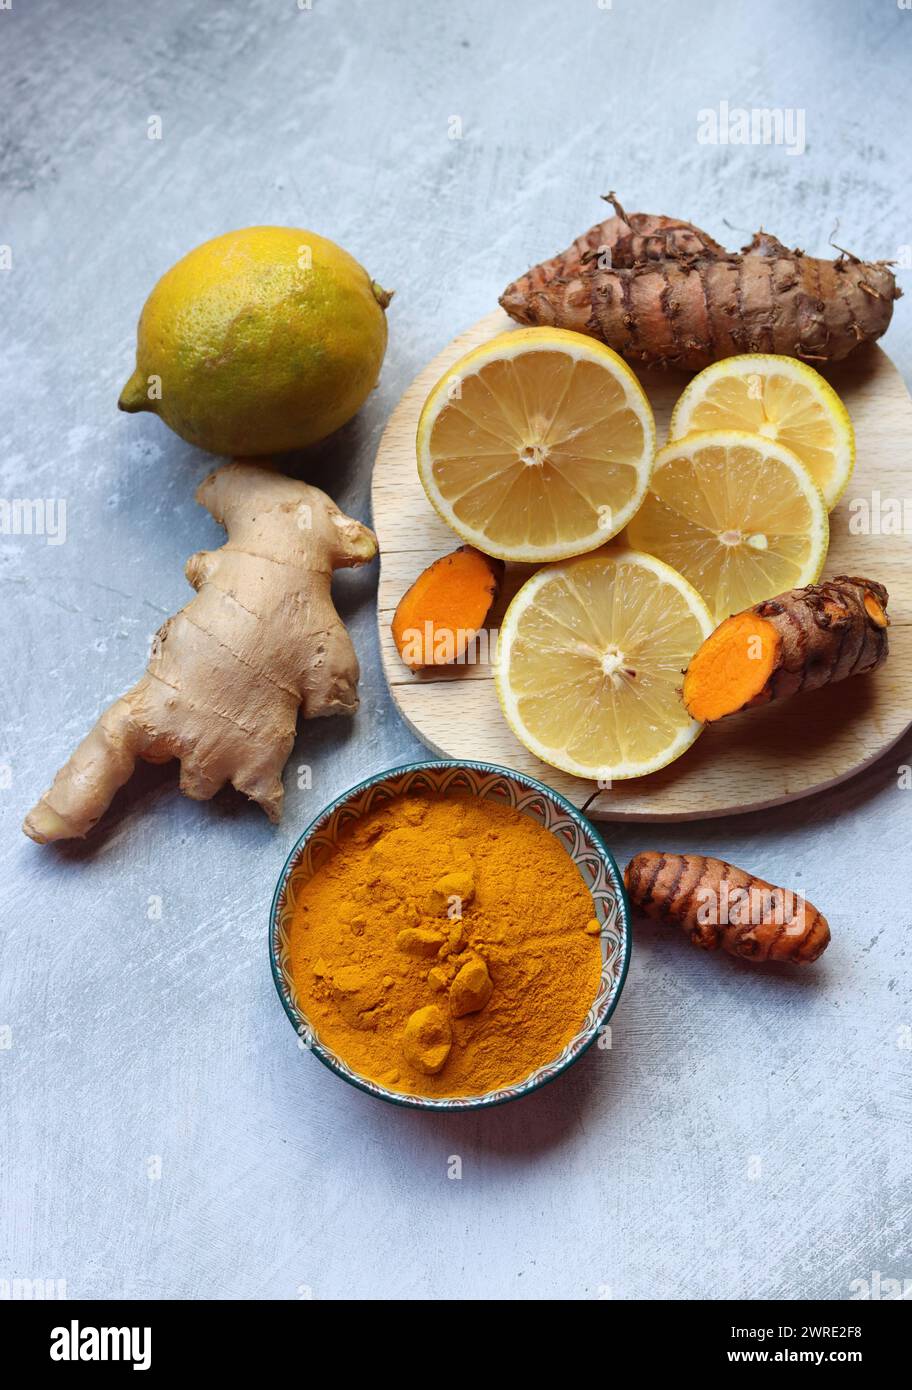 Still life with ginger, turmeric and lemon. Healthy food close up. Cold and flu season concept. Stock Photo